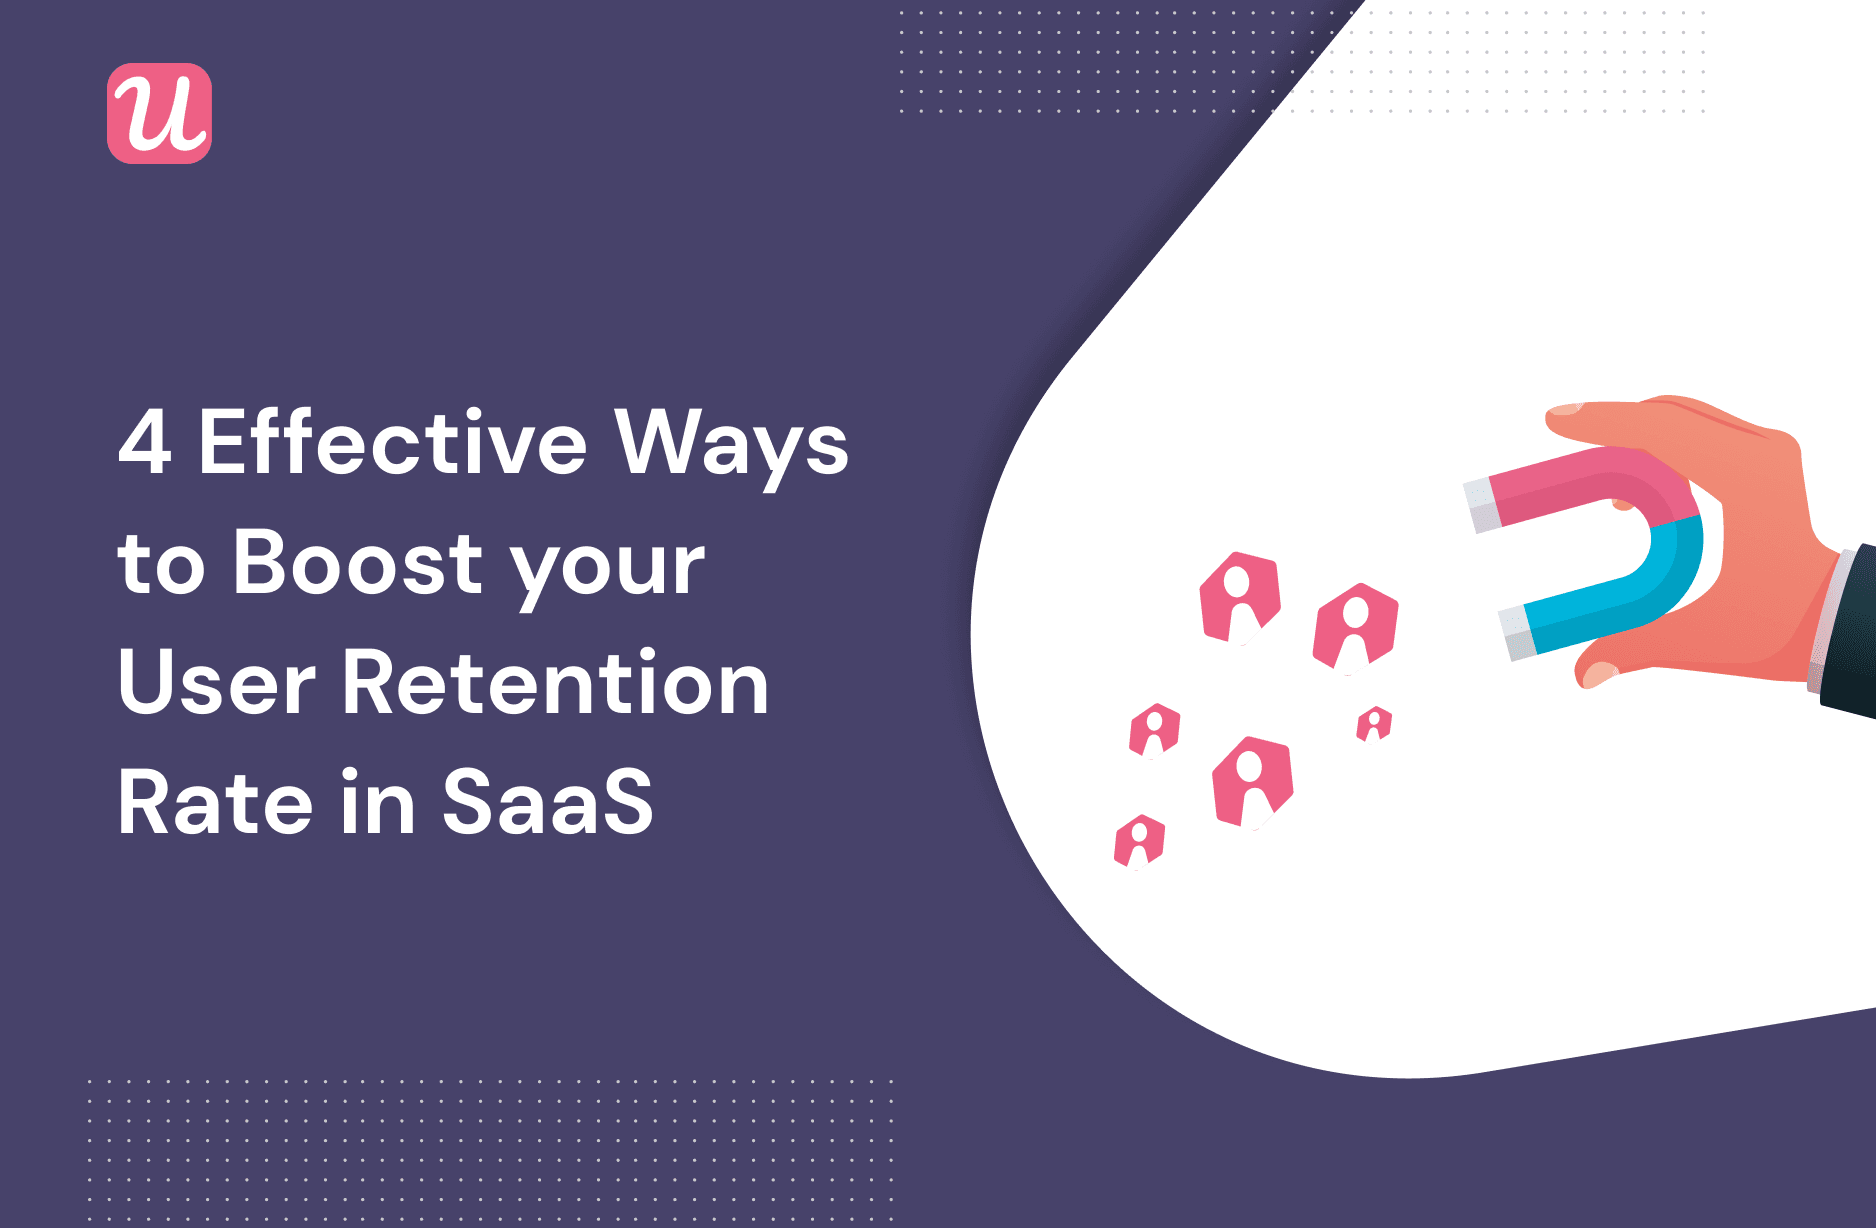 4 Effective Ways To Boost Your User Retention Rate In SaaS